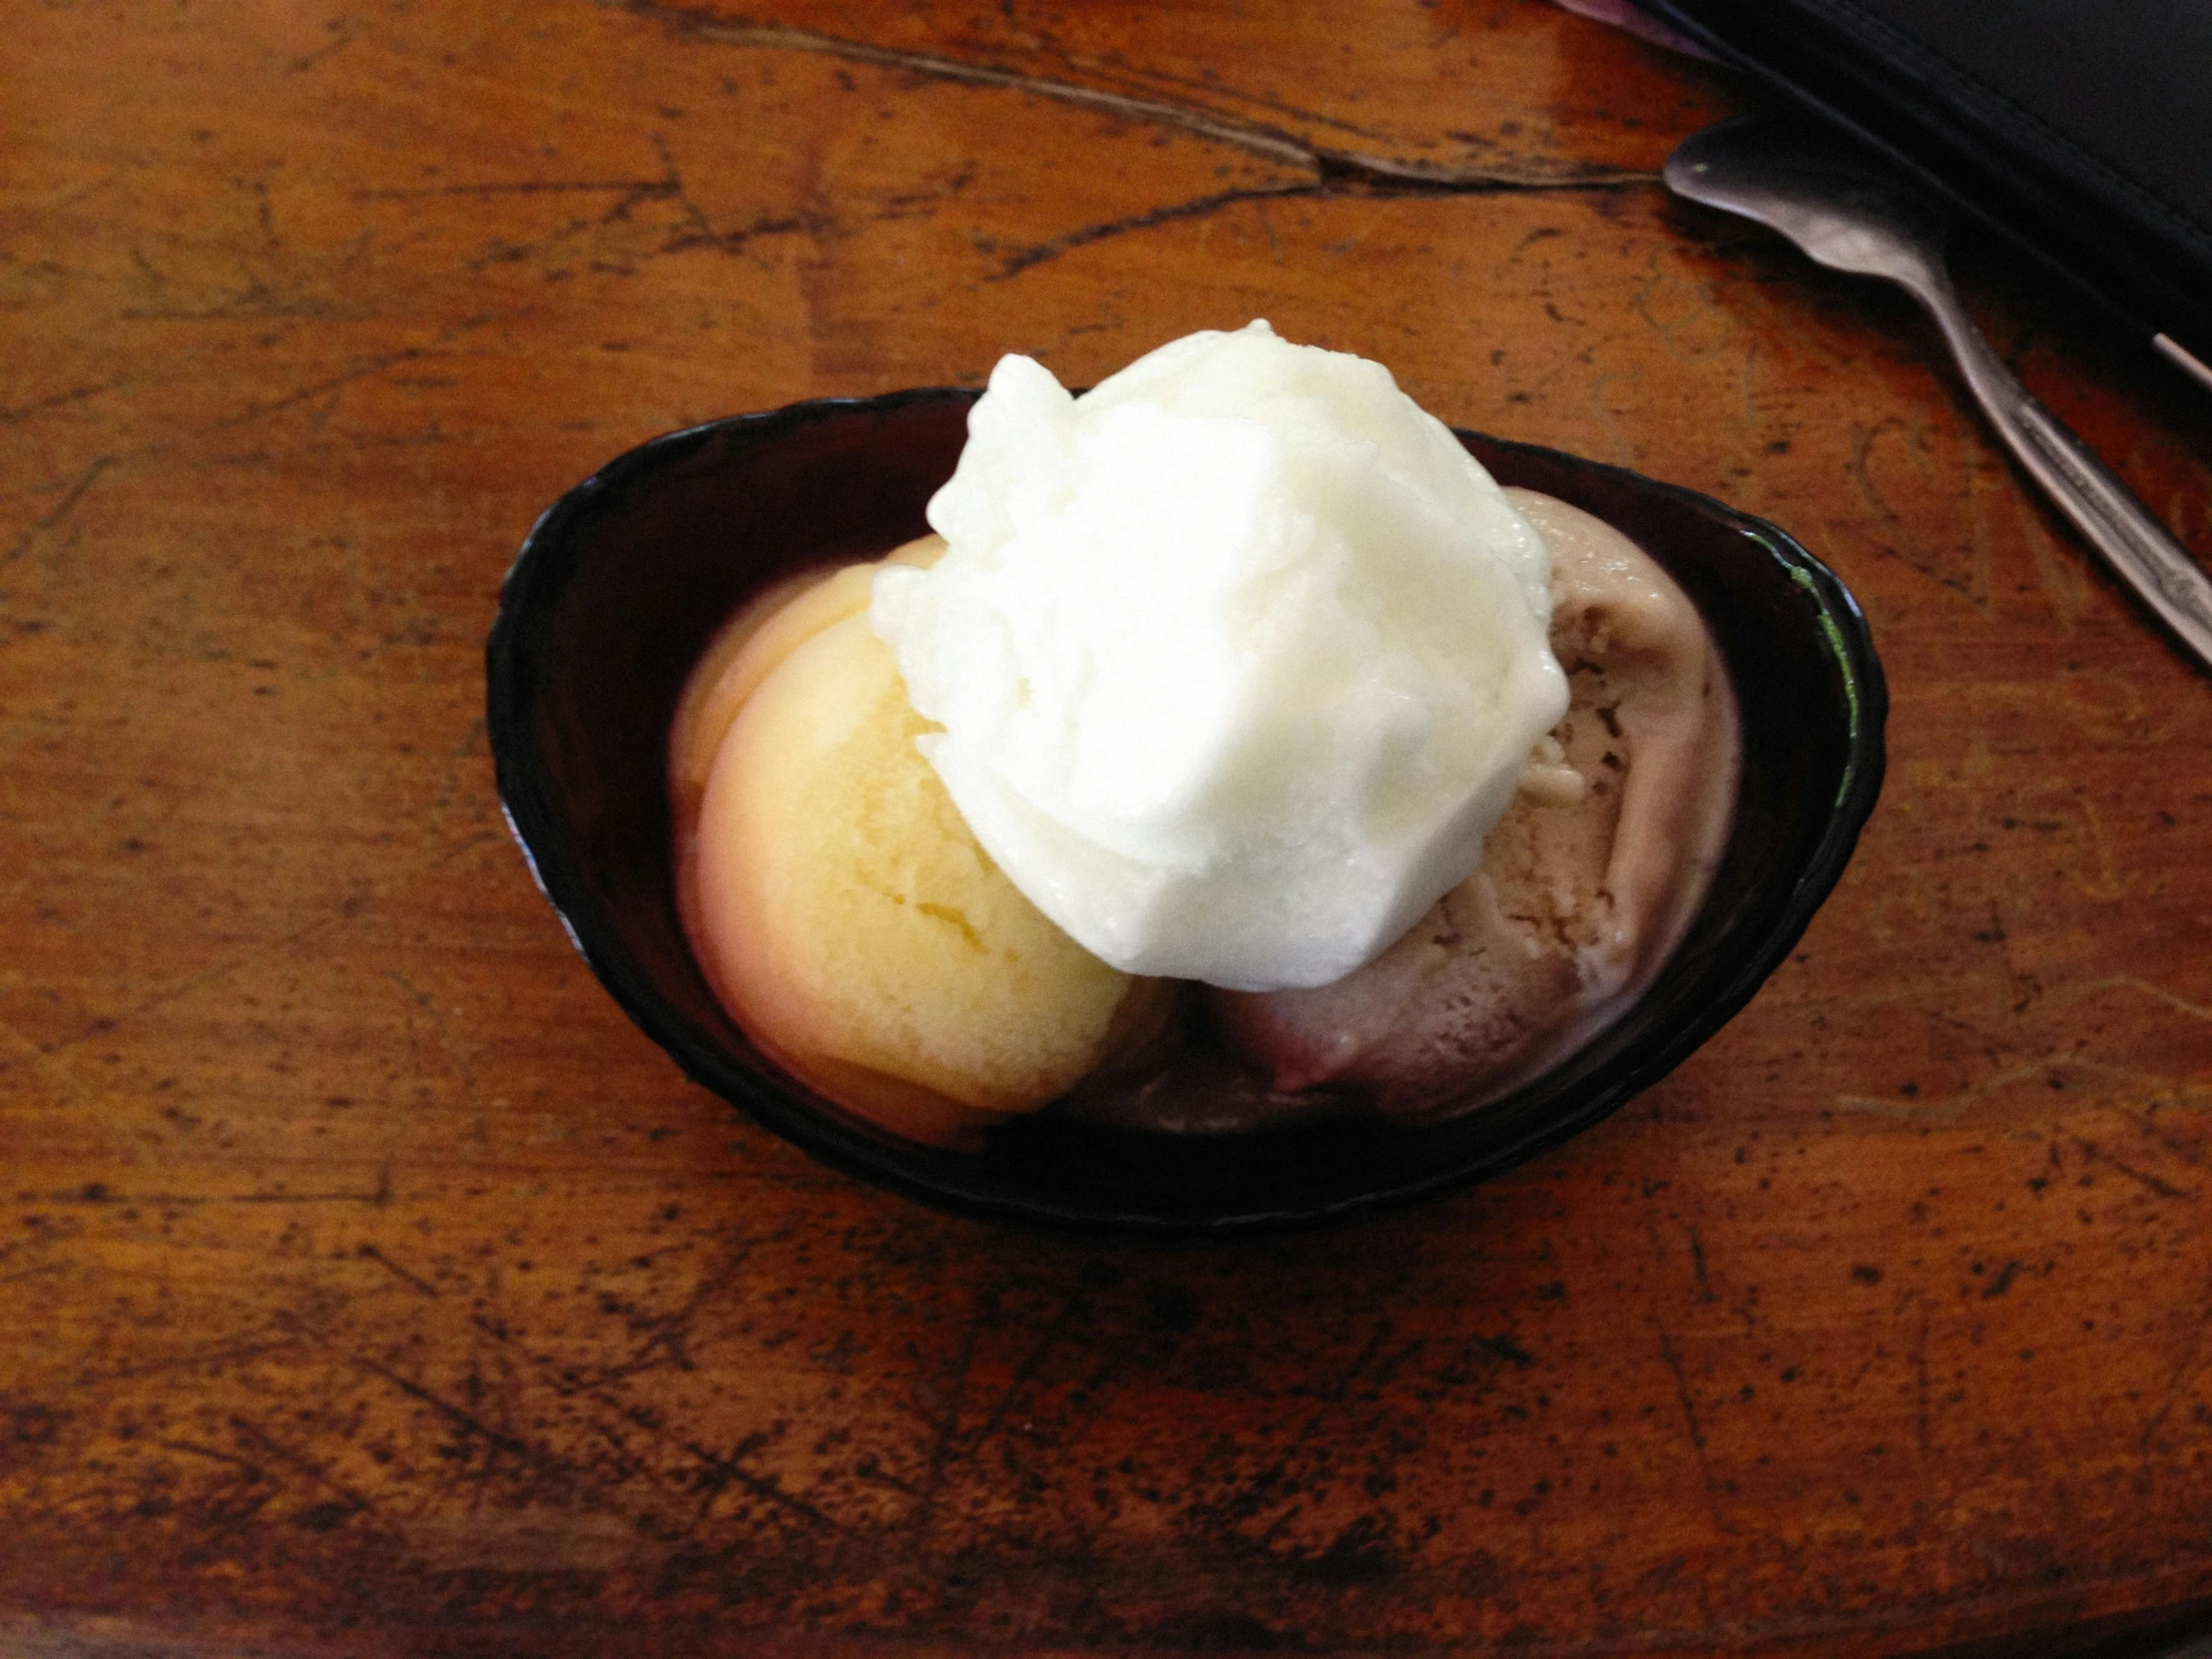 a wooden table topped with a bowl filled with ice cream and a fruit slice